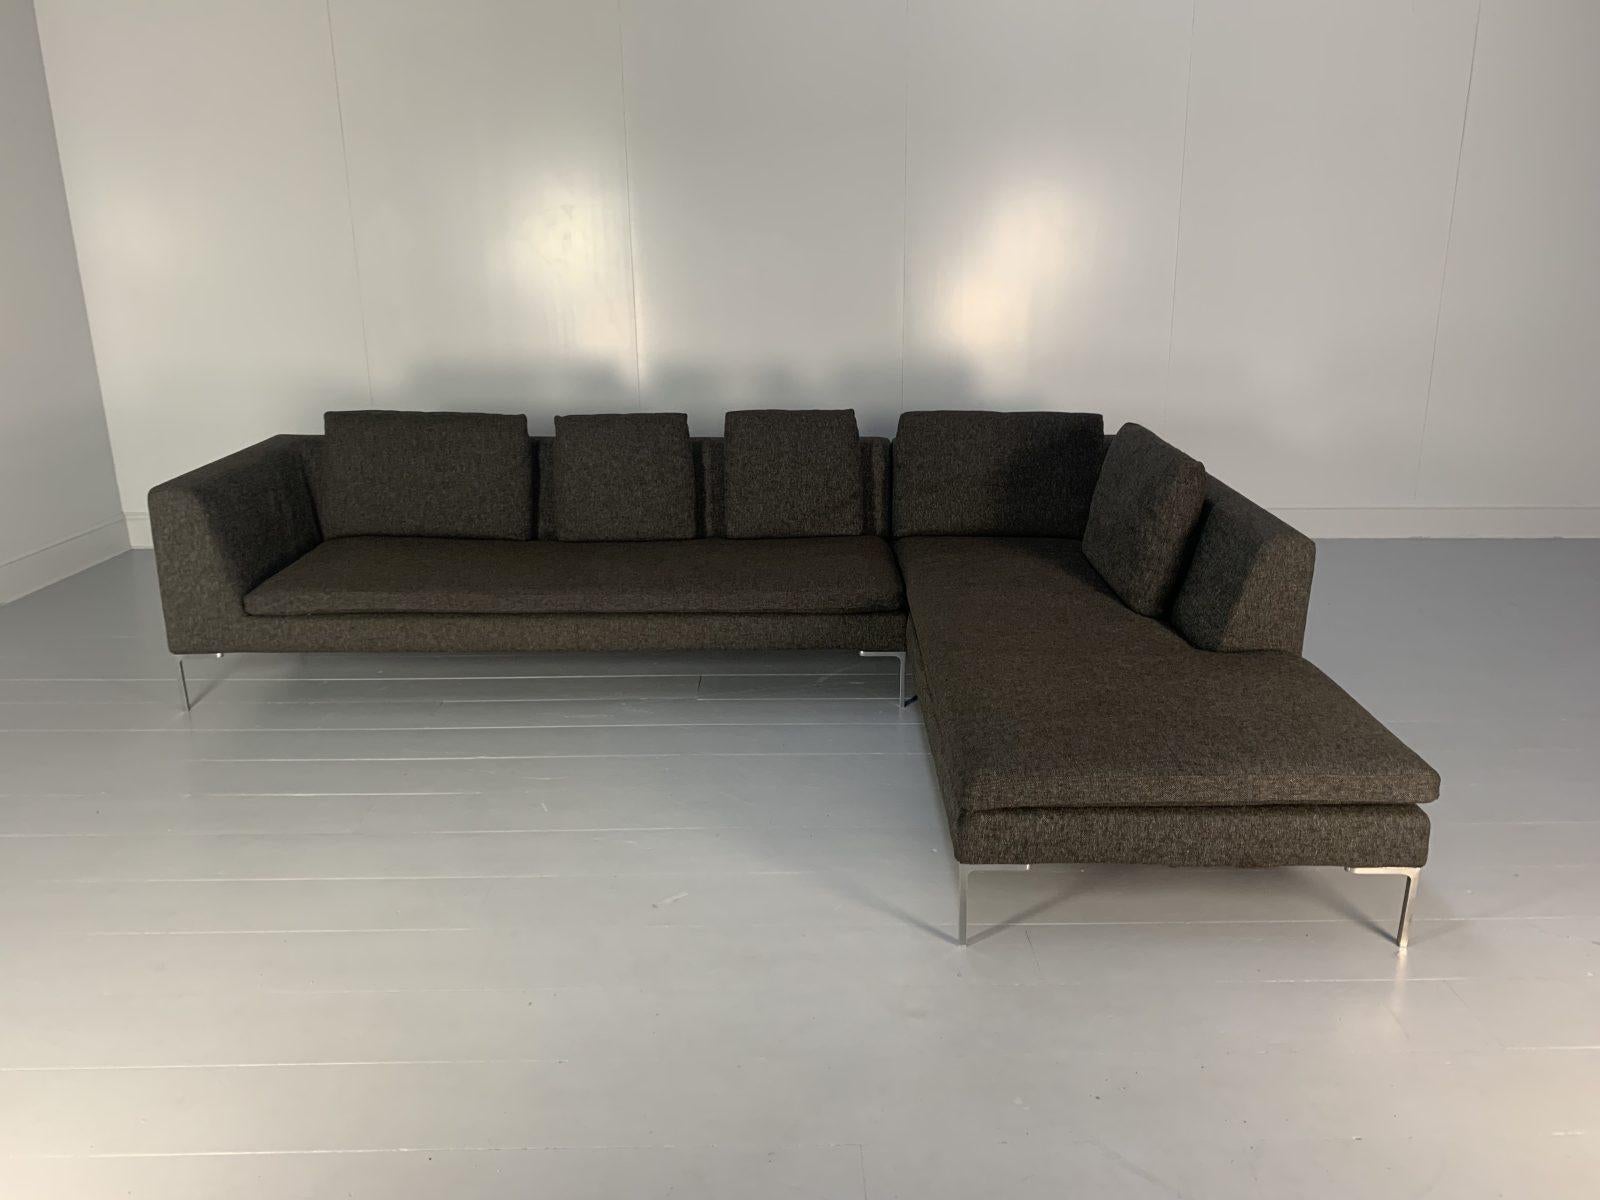 Hello Friends, and welcome to another unmissable offering from Lord Browns Furniture, the UK’s premier resource for fine Sofas and Chairs.

On offer on this occasion is an iconic “Charles” Sectional L-Shape Sofa (consisting of a CH228 section and